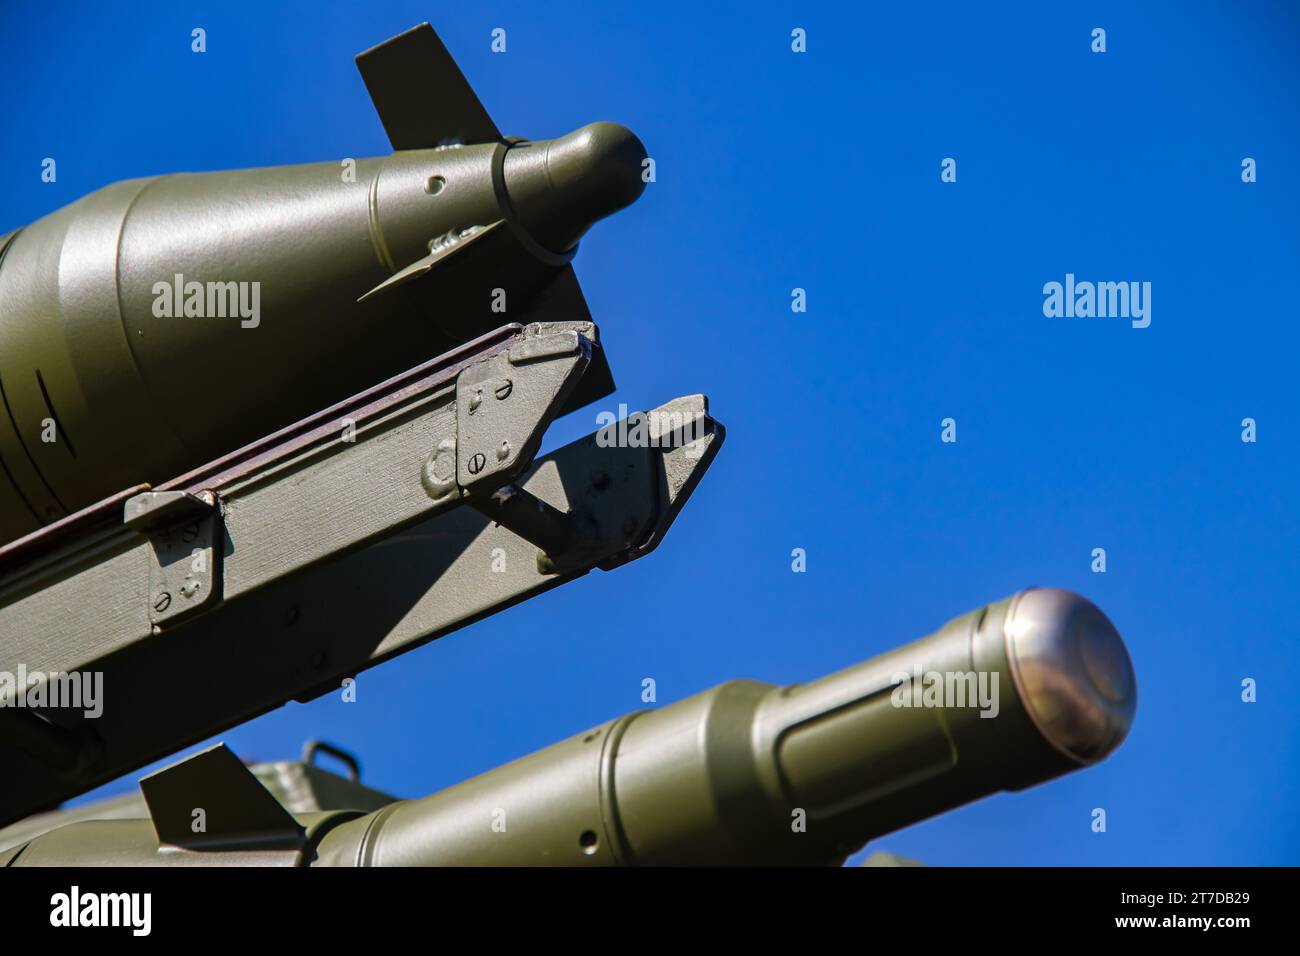 Modern sophisticated air defense missile system and rockets on self propelled launching weapon, exposed at arms international weapons fair in Belgrade Stock Photo